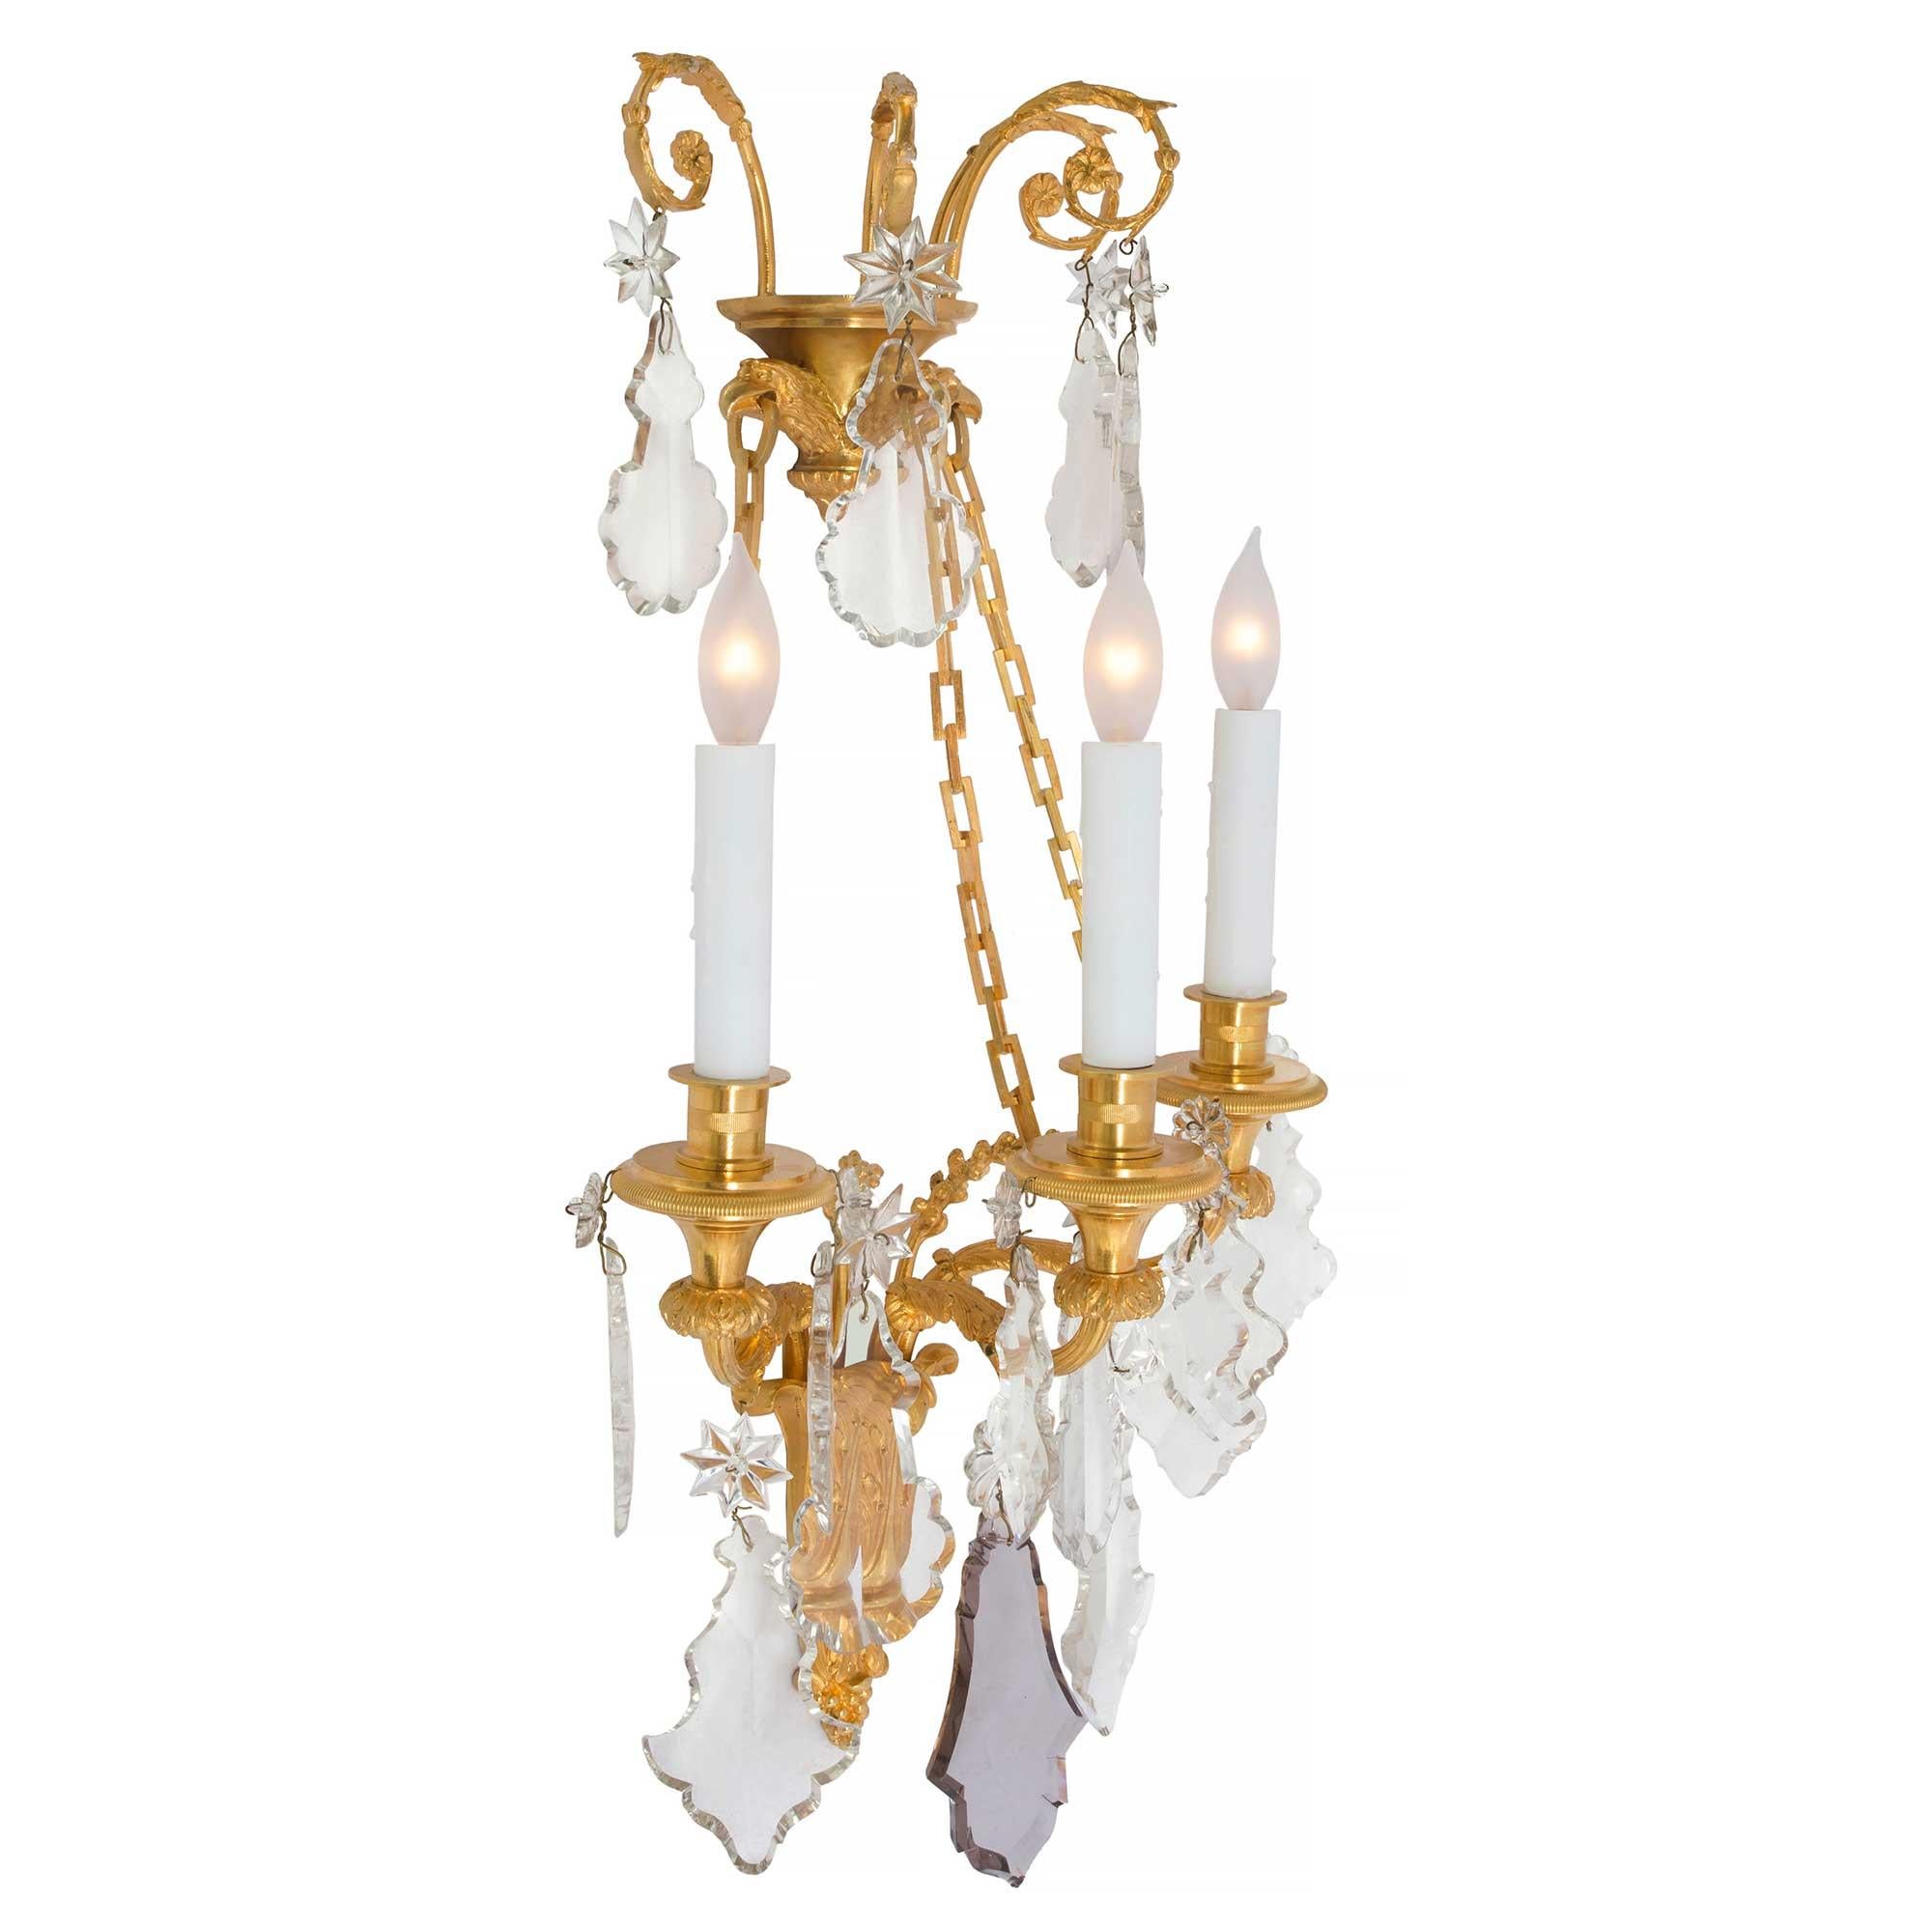 A pair of magnificent French 19th century Louis XVI style Baccarat crystal and ormolu three light sconces. Each sconce is centered by a striking acorn finial below richly chased acanthus leaves in a fine satin and burnished finish. Each of the